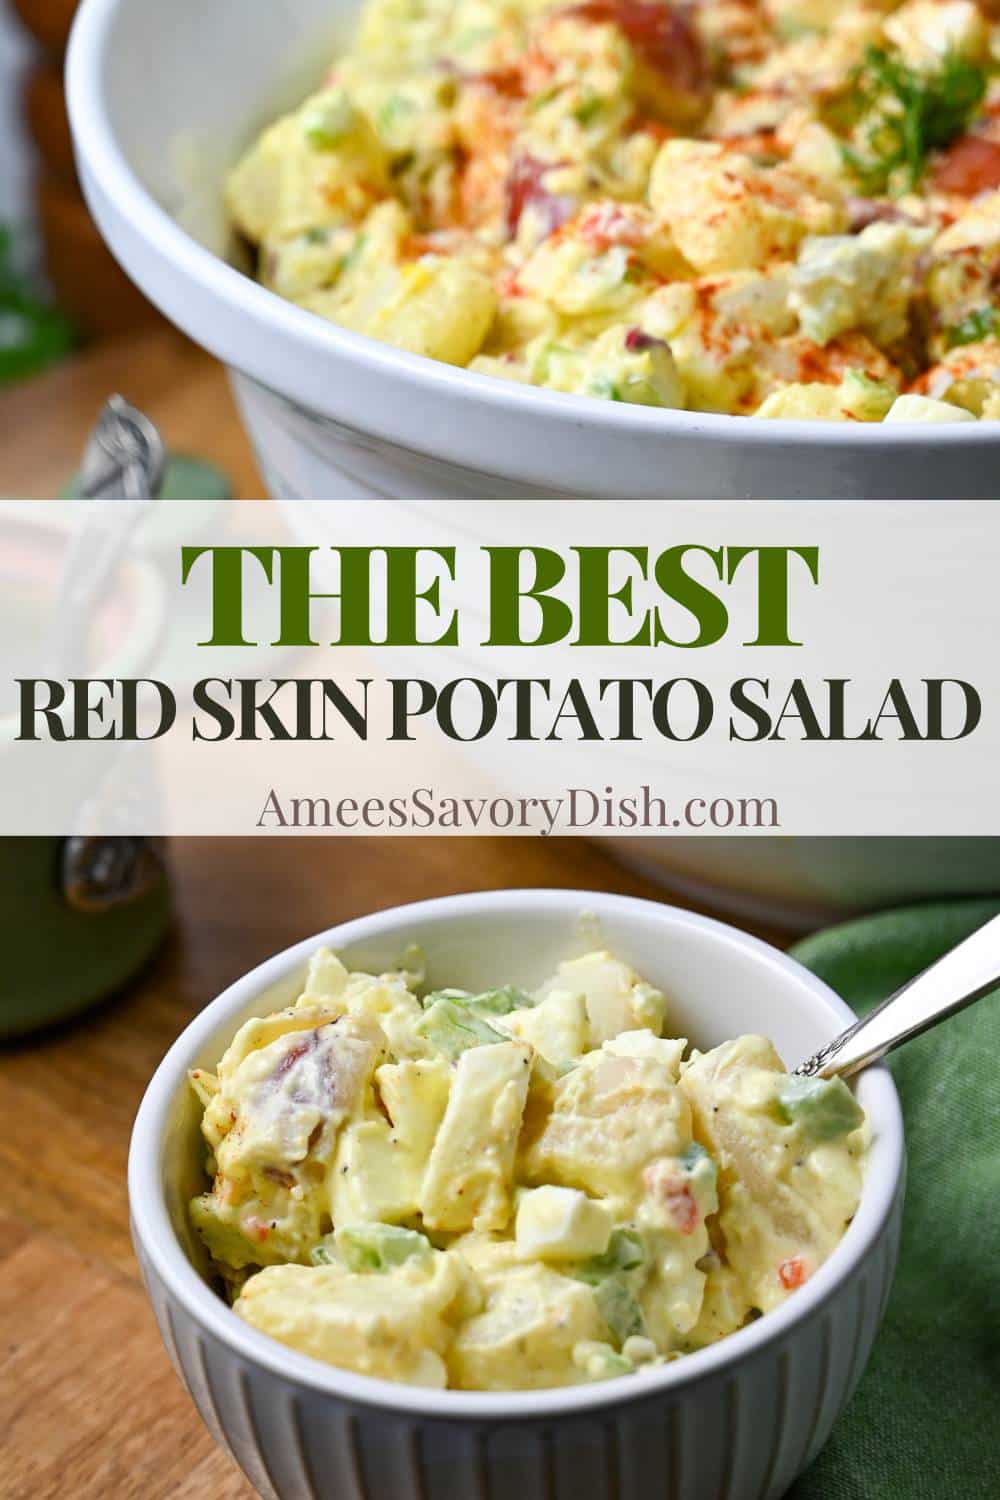 This is a family favorite recipe and hands-down, the best red skin potato salad around! A special added ingredient gives it so much flavor! via @Ameessavorydish